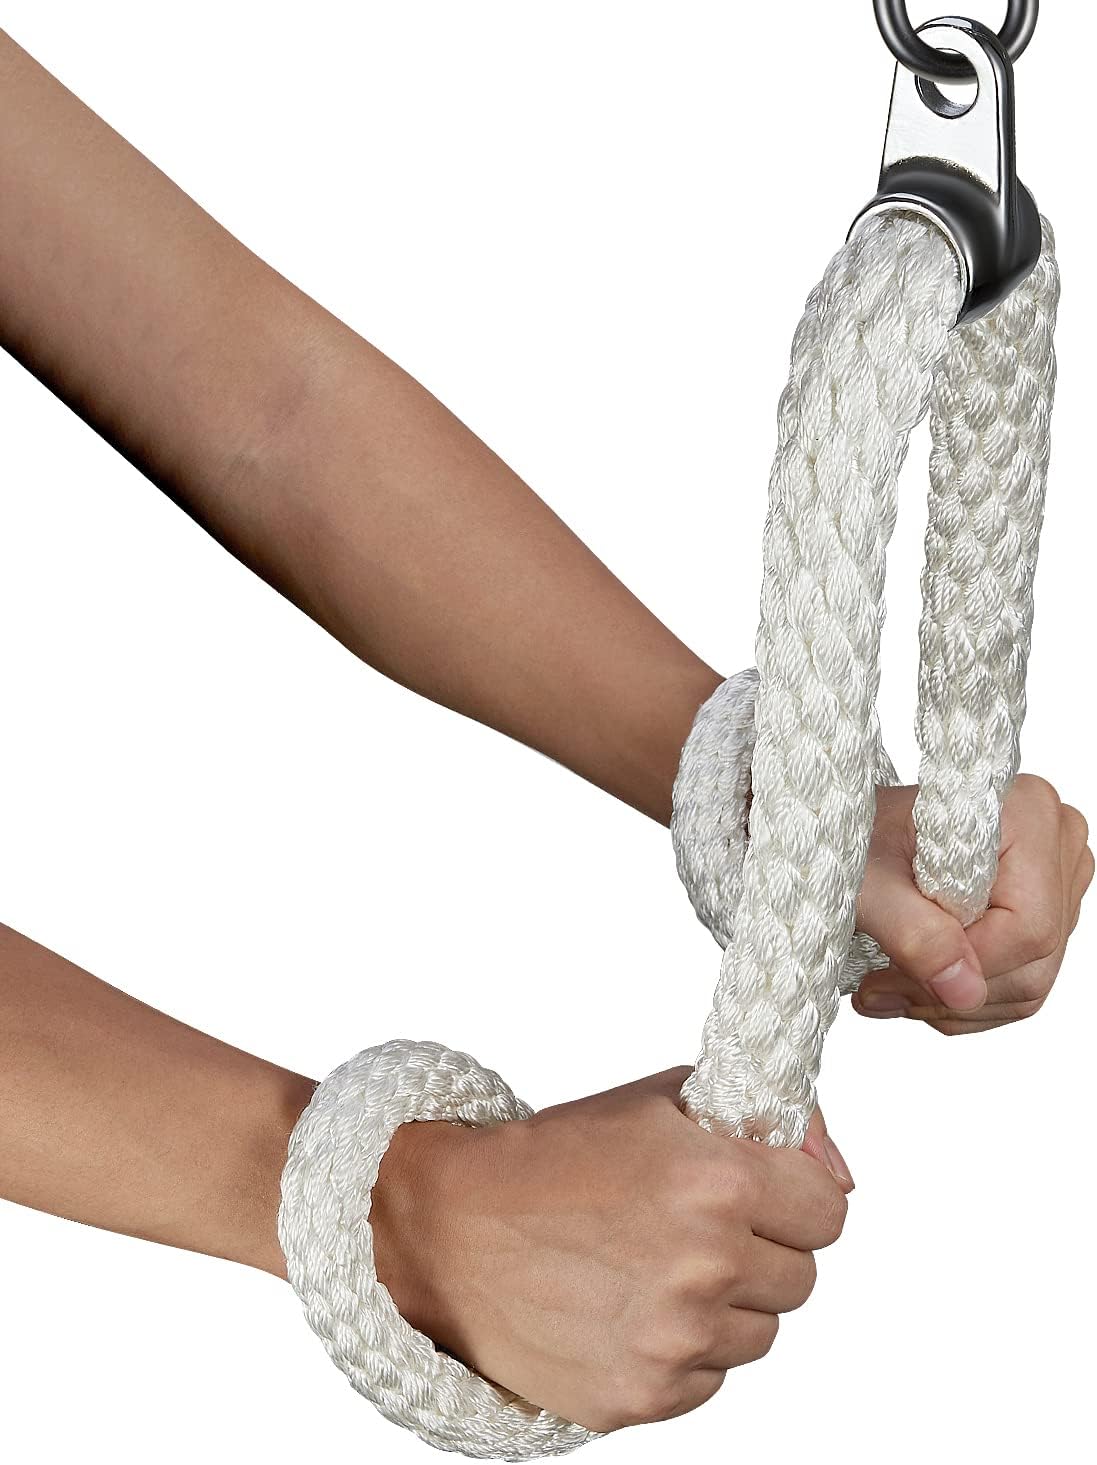 HPYGN Tricep Rope Review